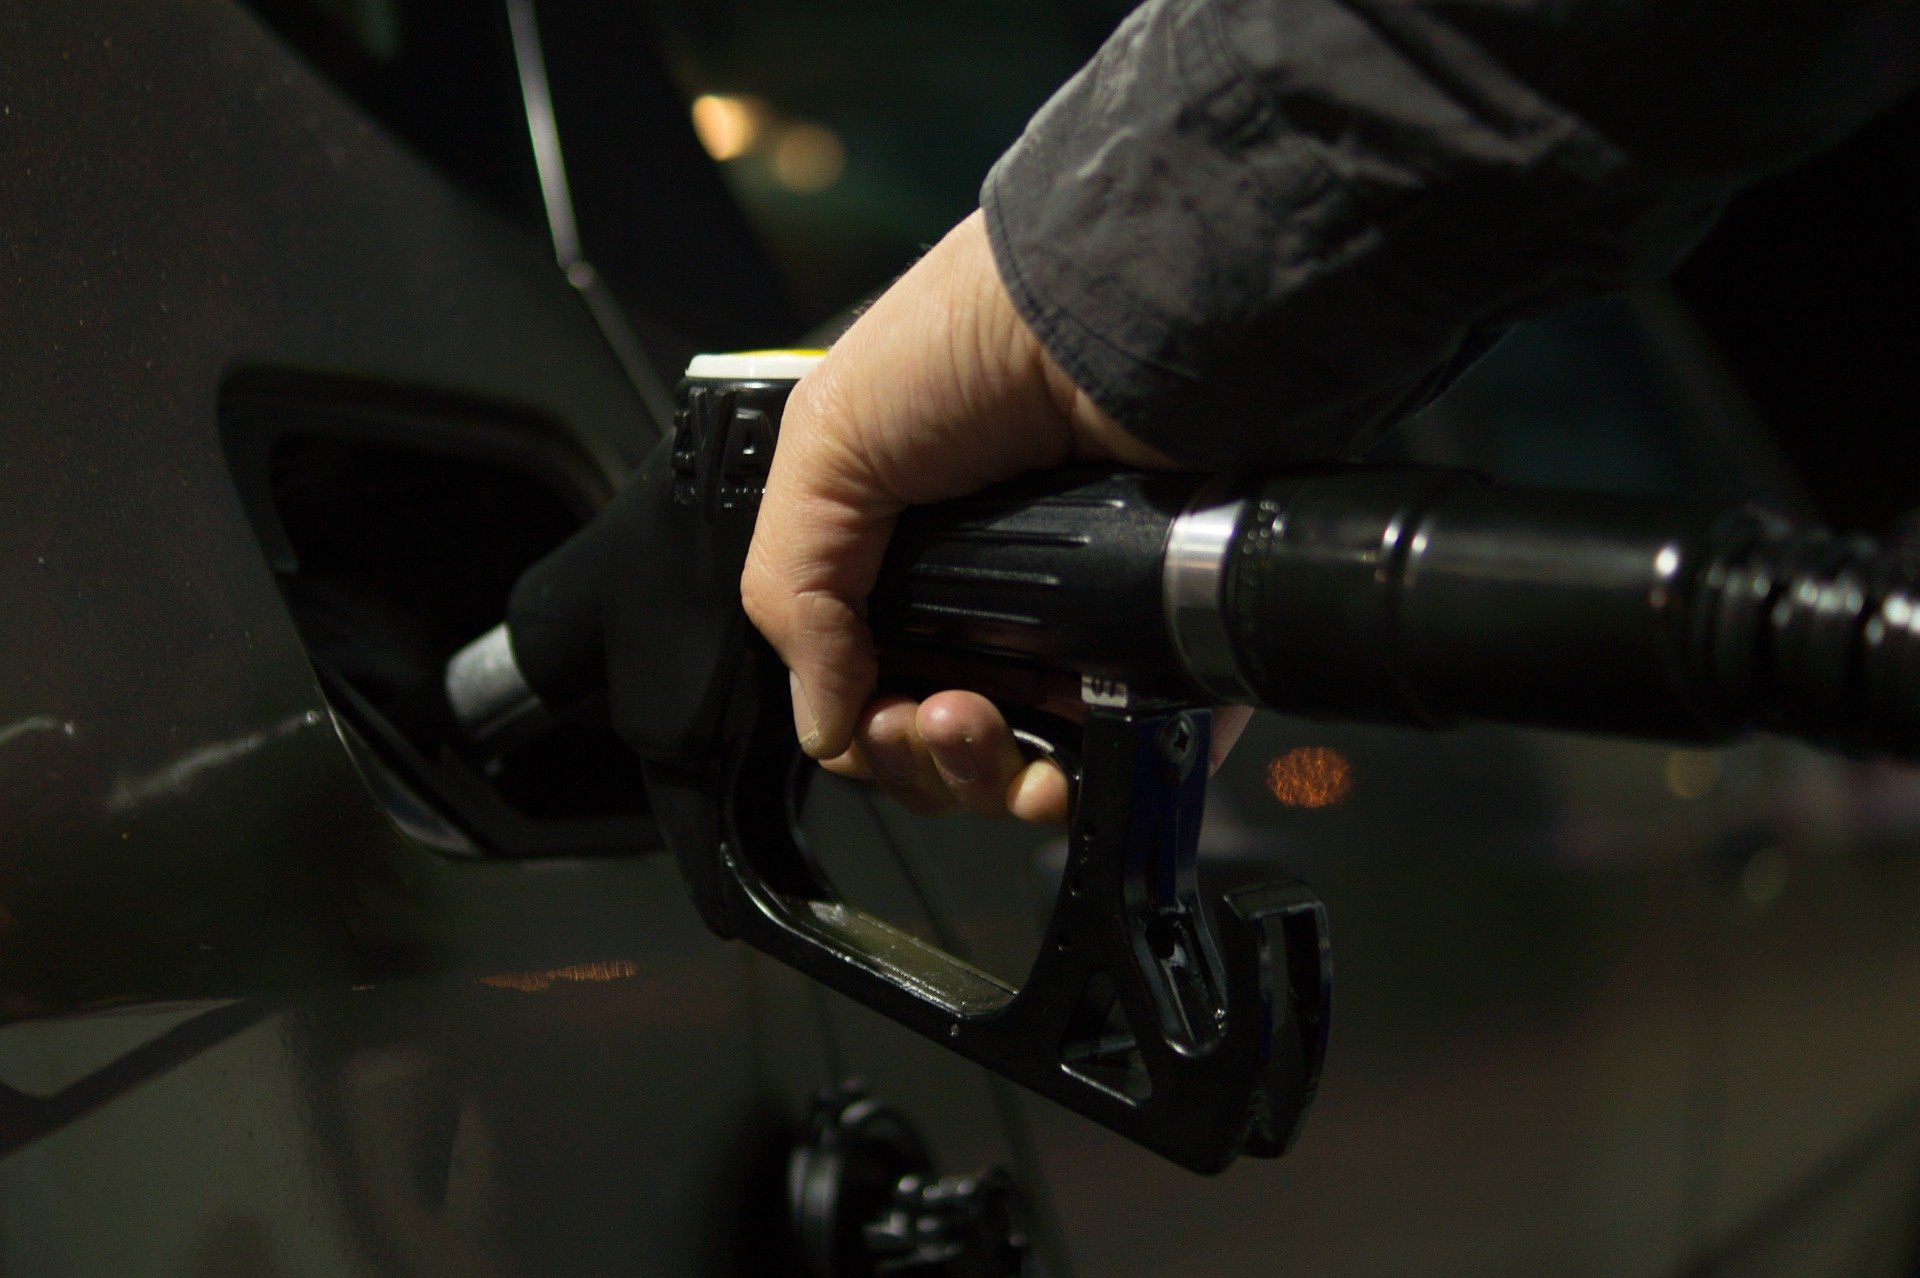 Fuel prices: Petrol priced at Rs 95.41, diesel Rs 86.67 in Delhi on March 3, 2022